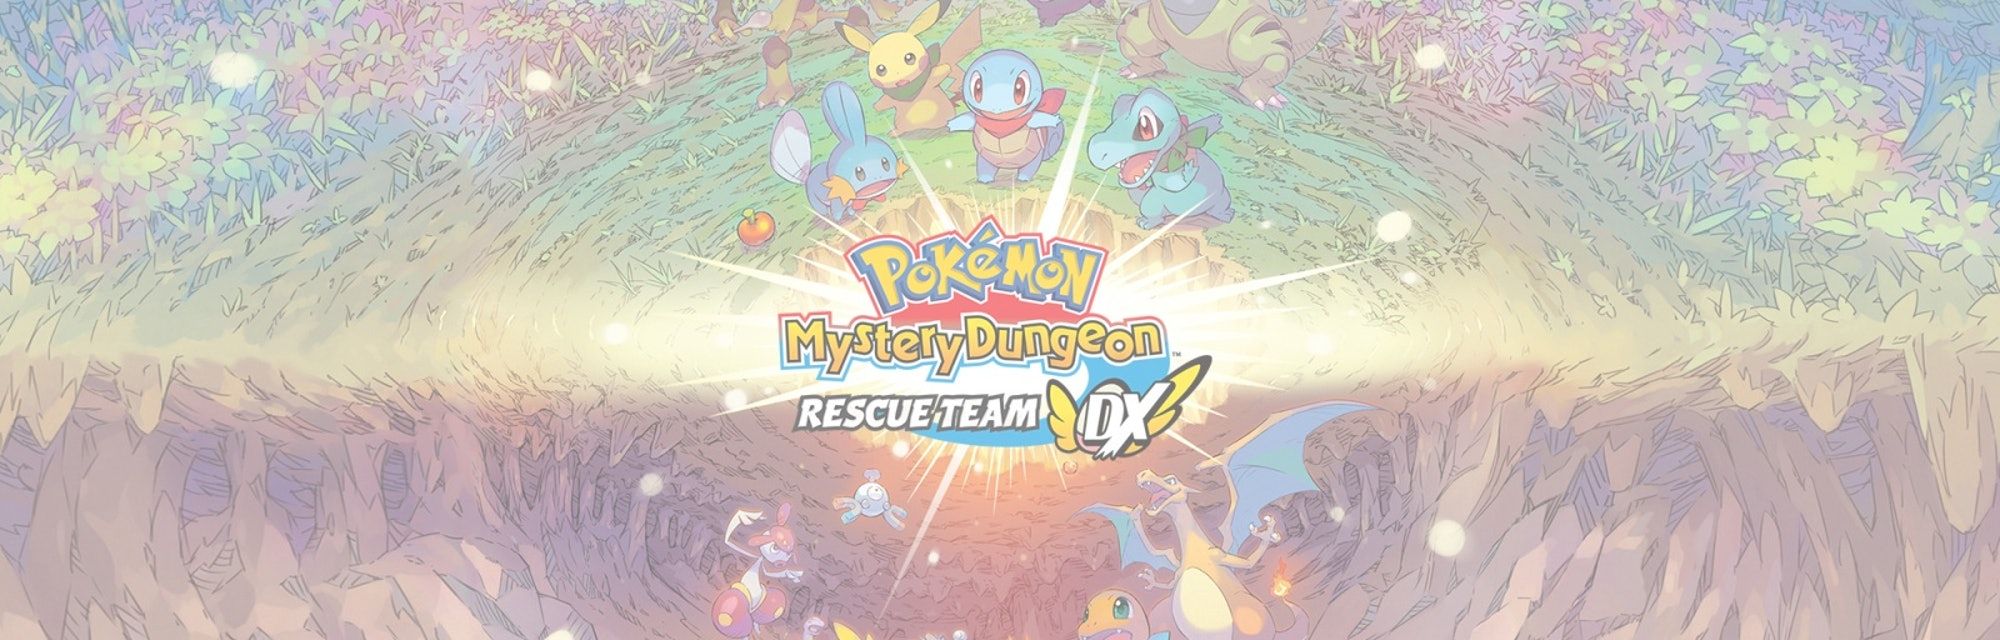 Pokémon Mystery Dungeon' quiz: Every weird question, answers